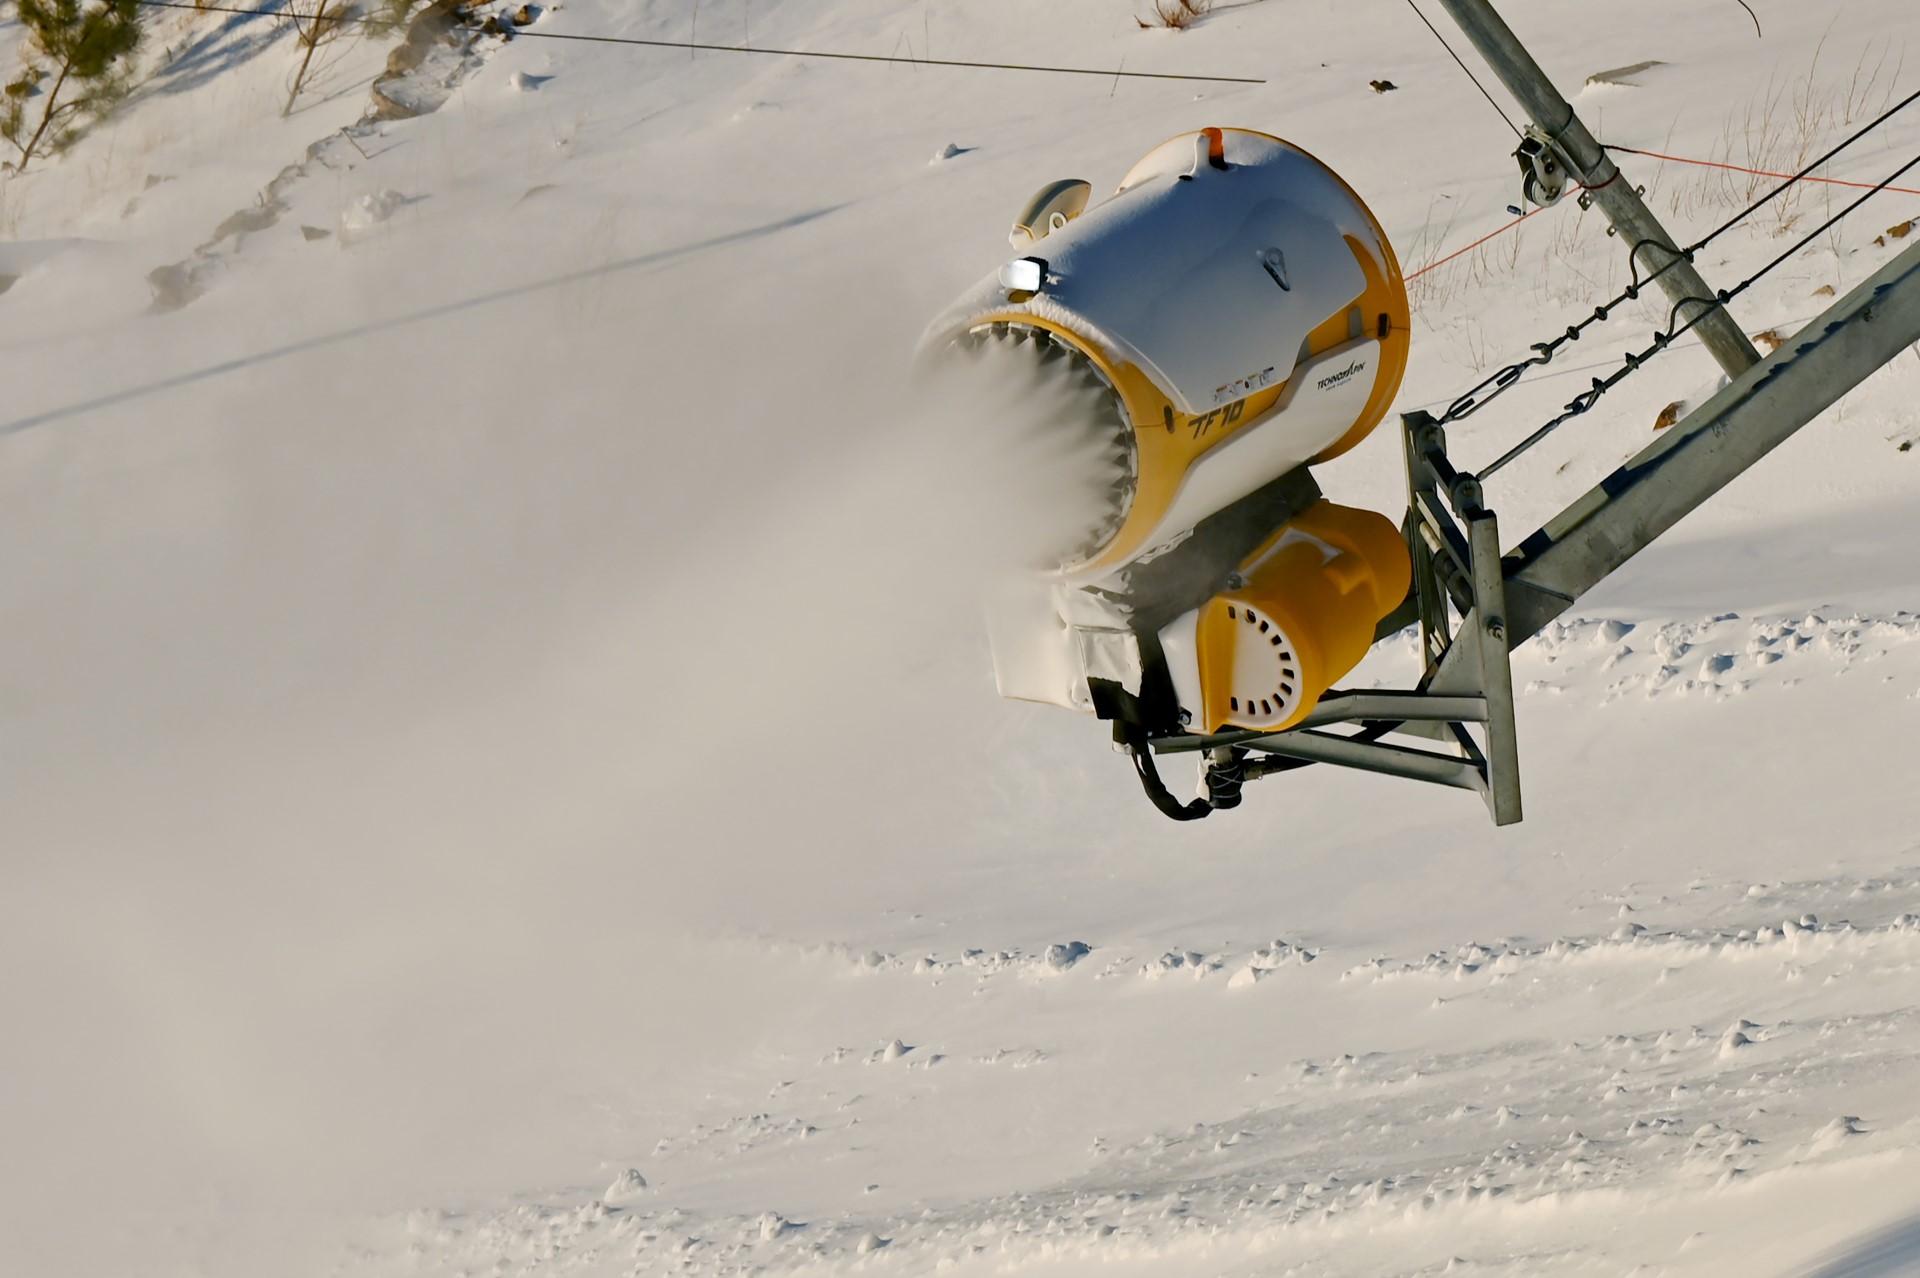 This file photo taken on Dec 17, shows a snow machine spreading artificial snow at the National Alpine Skiing Centre, venue for the Beijing 2022 Winter Olympic Games, in Yanqing. Photo: AFP